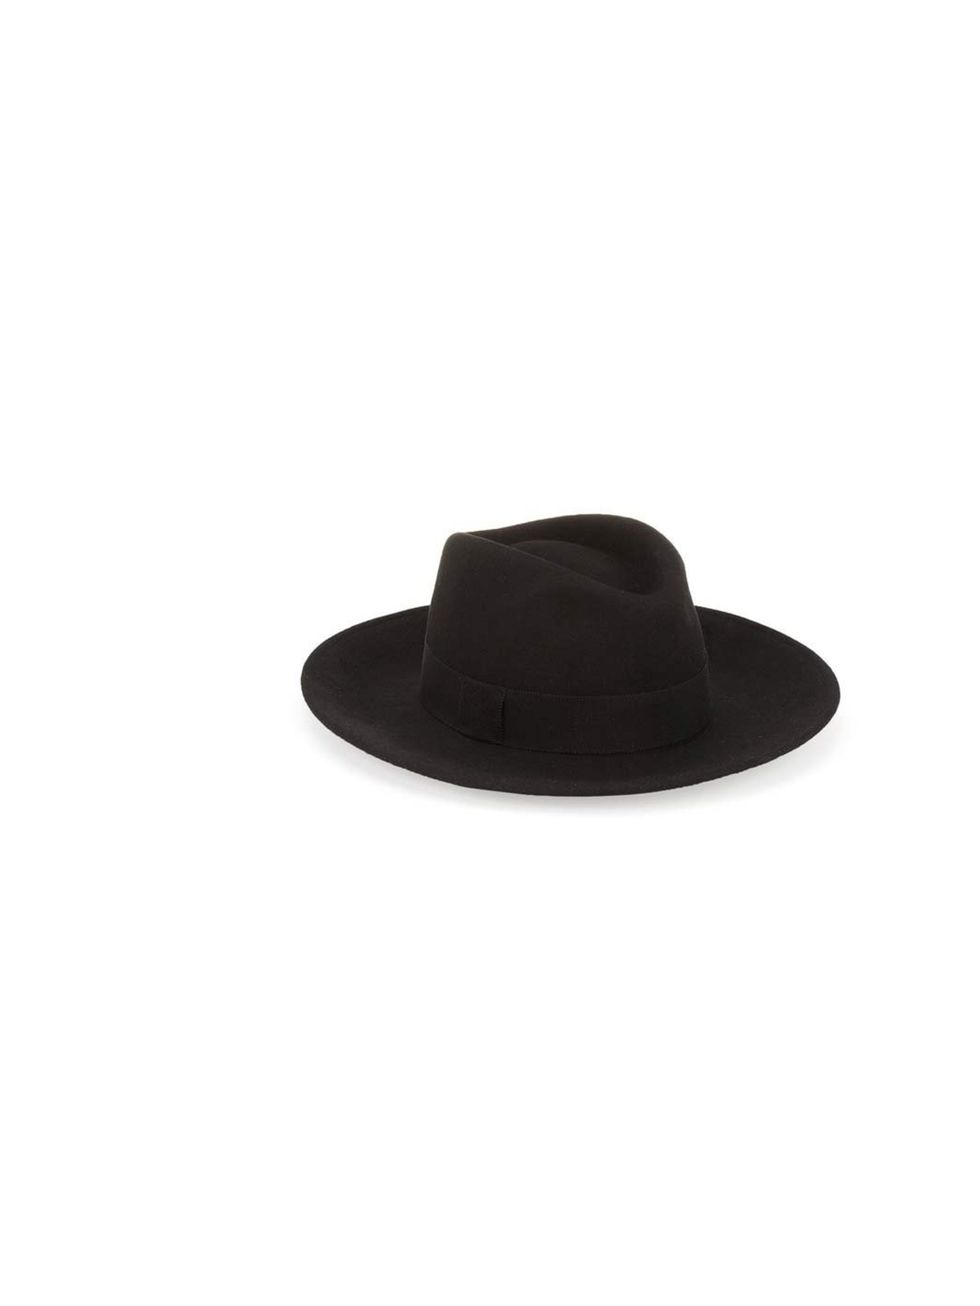 <p>Lend an androgynous edge to your style with this classic fedora. </p><p><a href="http://www.whistles.co.uk/fcp/product/whistles//fedora-felt-hat/903000061406">Whistles</a> hat, £55</p>